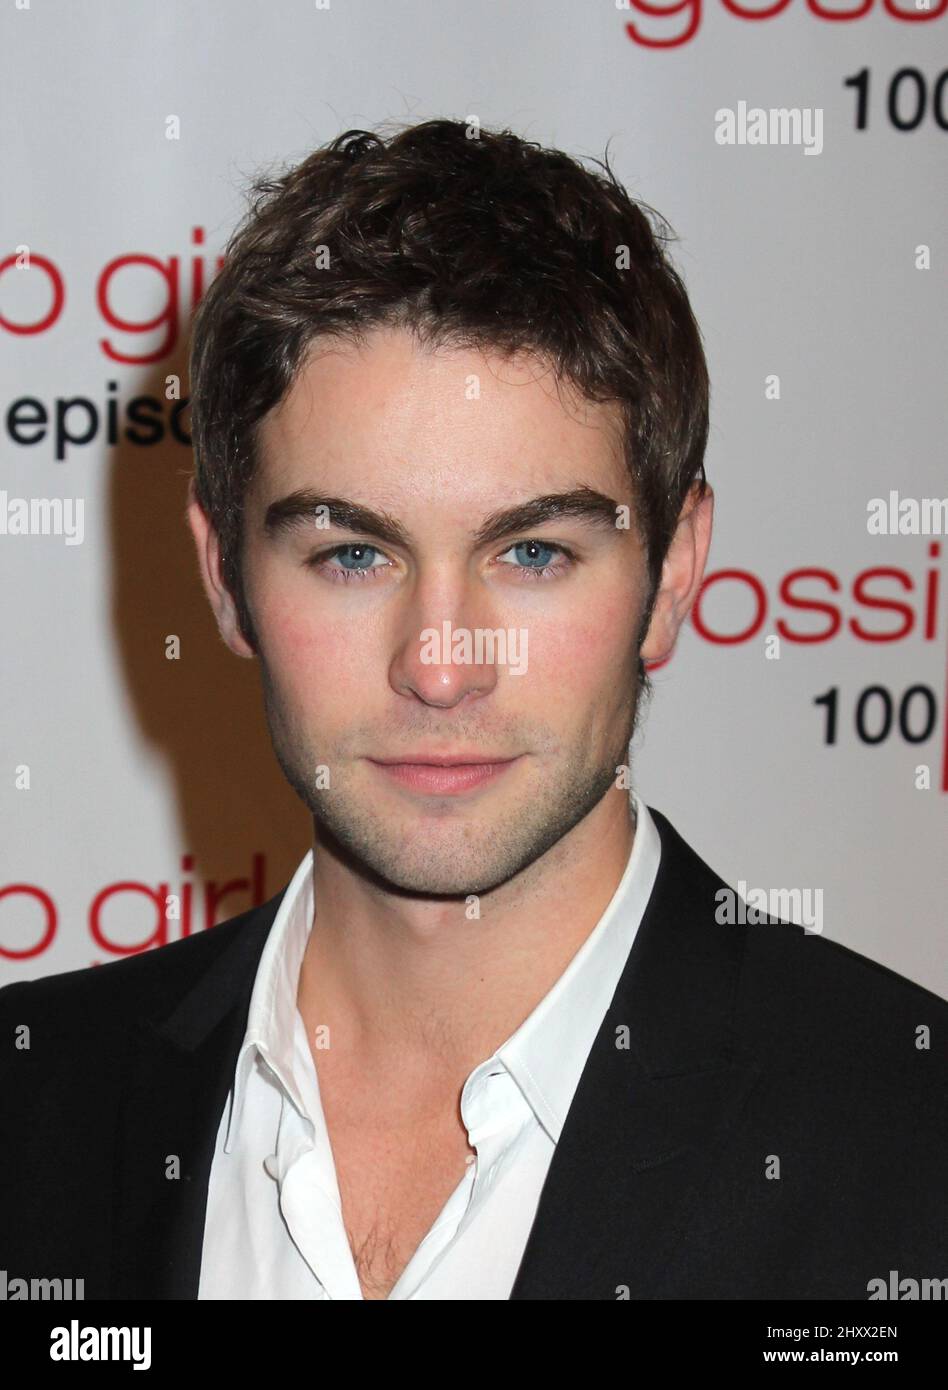 Chace Crawford at the 'Gossip Girl' 100th episode celebration at Cipriani Wall Street in New York Stock Photo